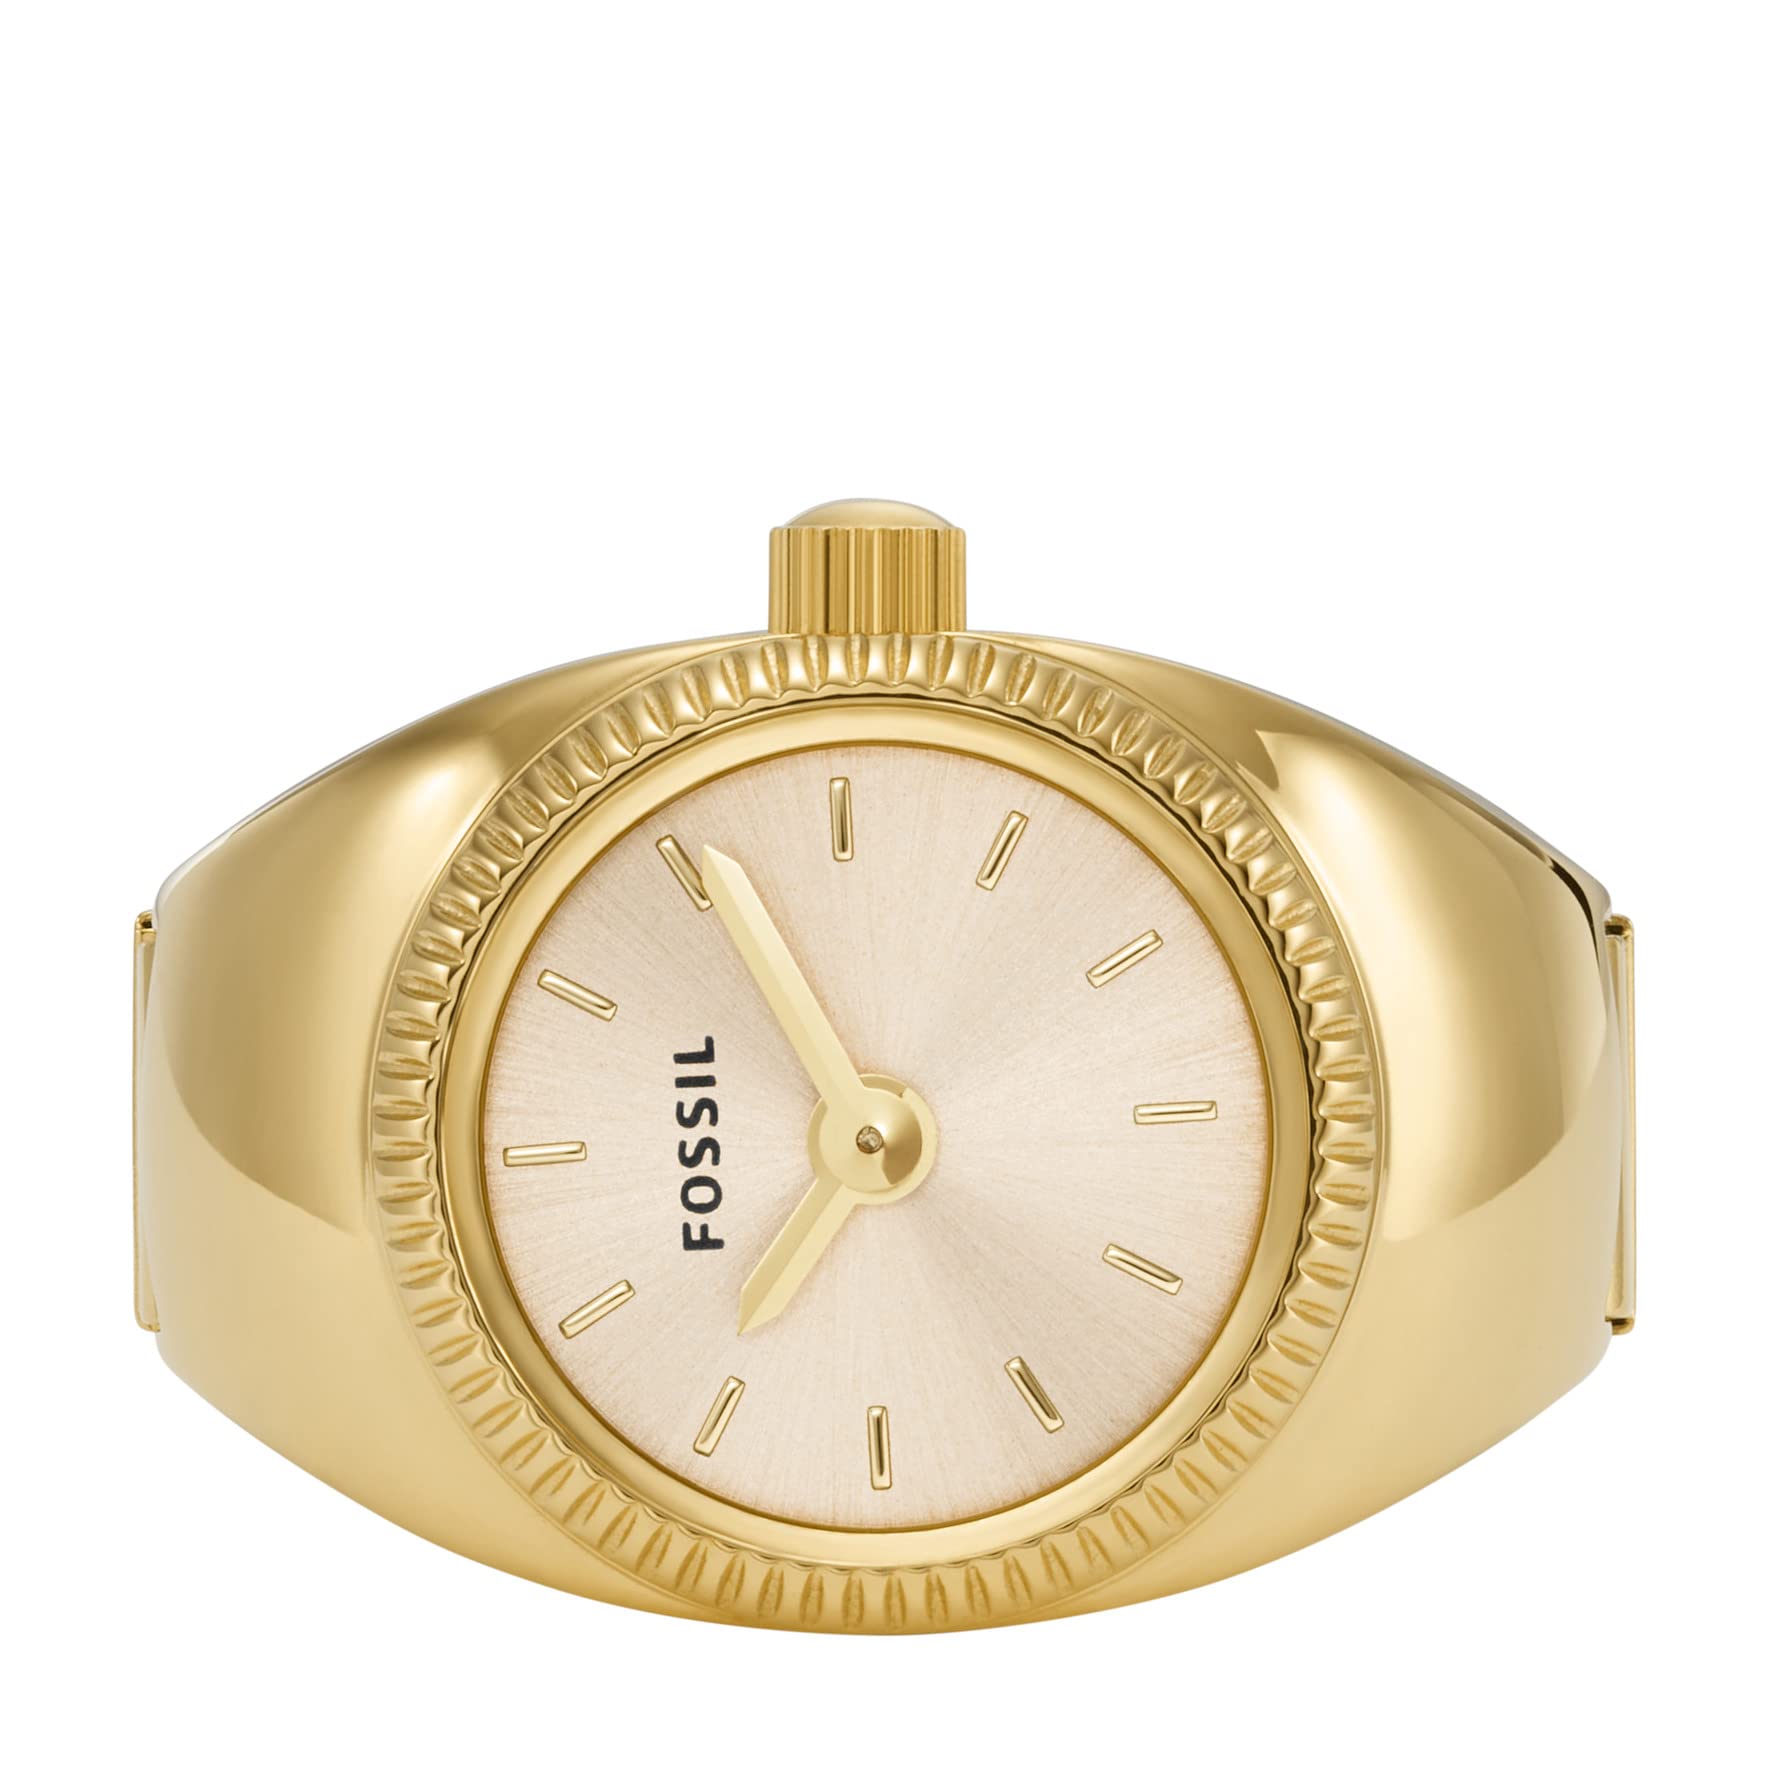 Fossil Women's Watch Ring with Two-Hand Analog Display and Stainless Steel Expansion Band